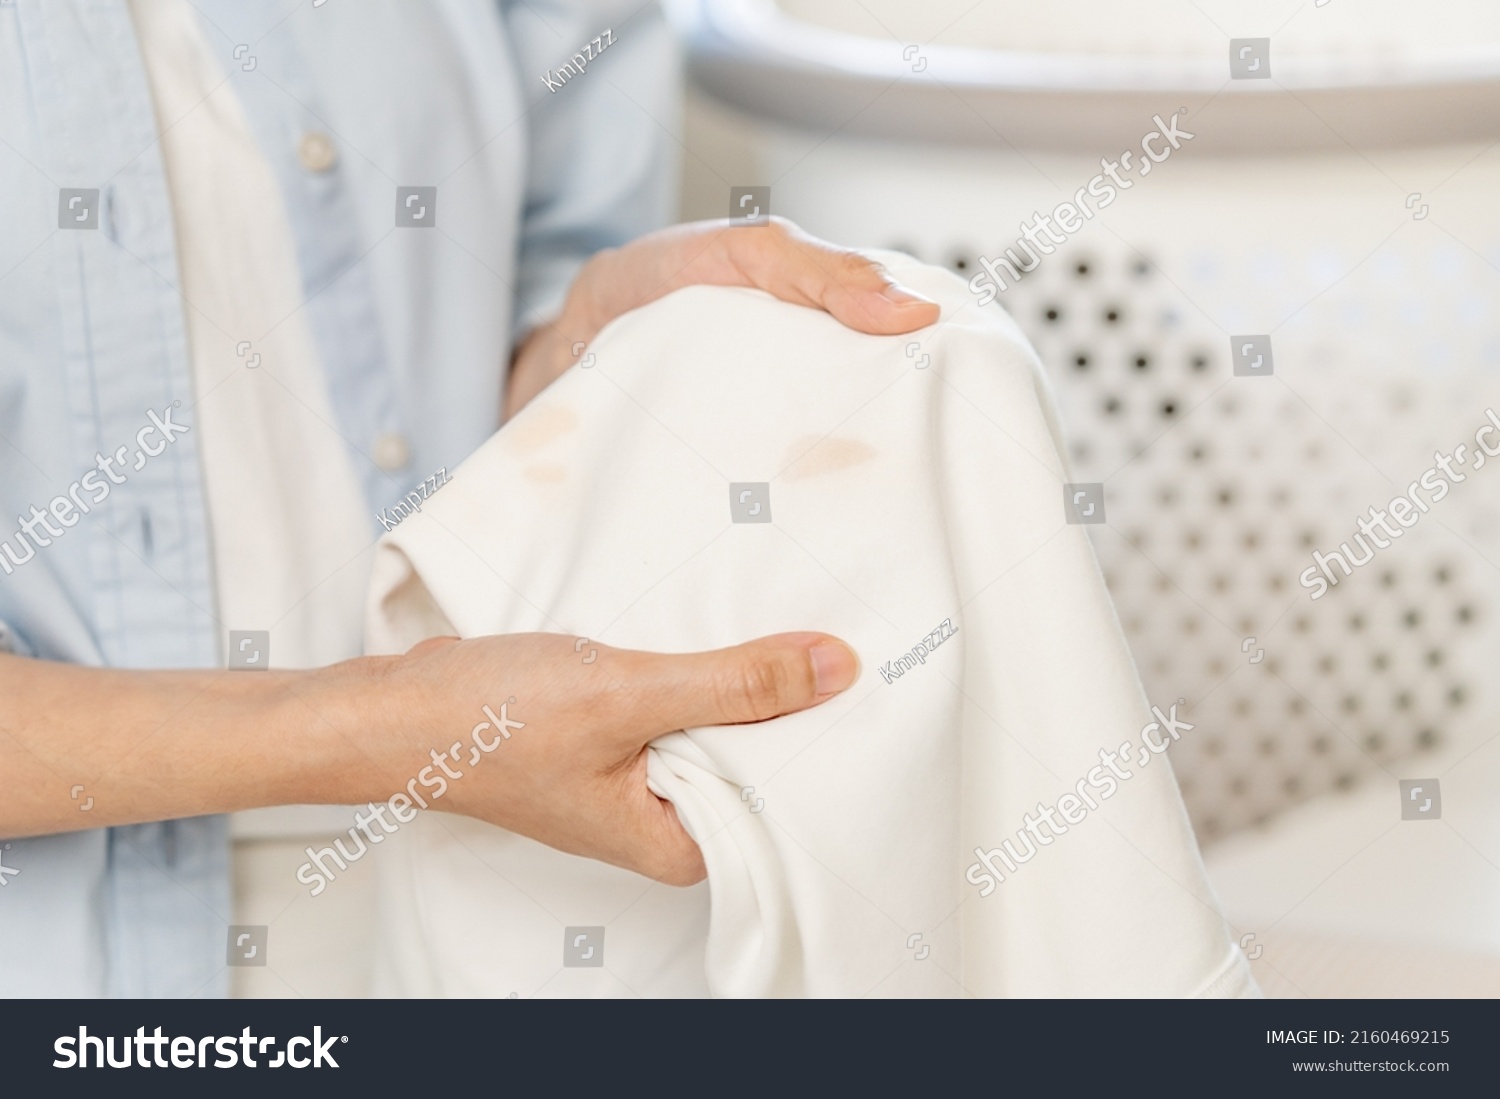 Housewife, asian young woman hand in holding shirt, showing making stain, spot dirty or smudge on clothes, dirt stains for cleaning before washing, making household working at home. Laundry and maid. #2160469215